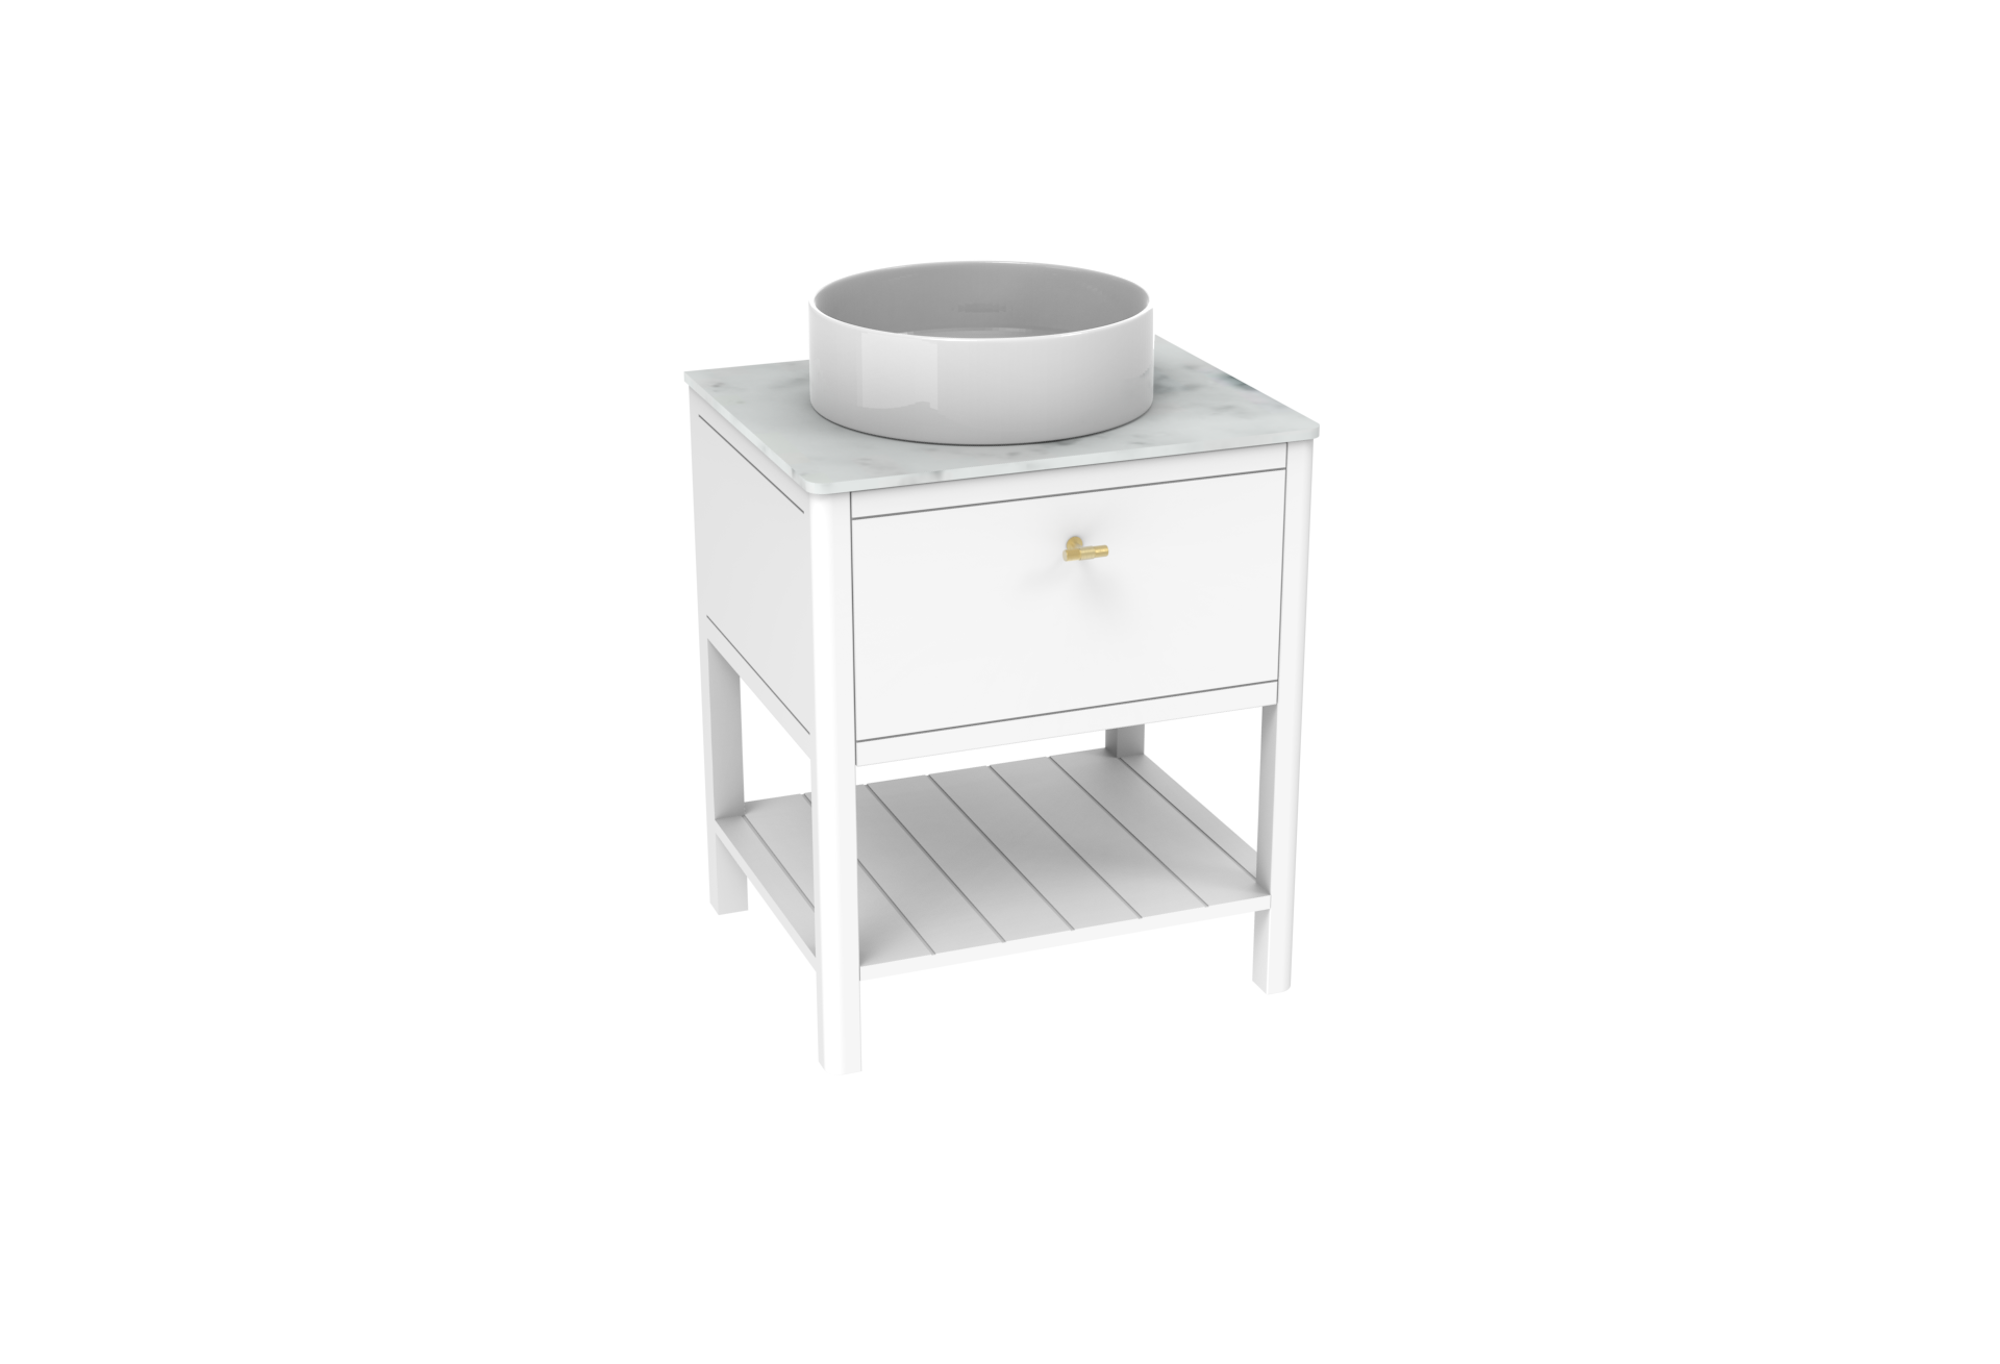 The New FRONTIER 60cm 1 drawer floor standing unit with undermount tray - Matte White